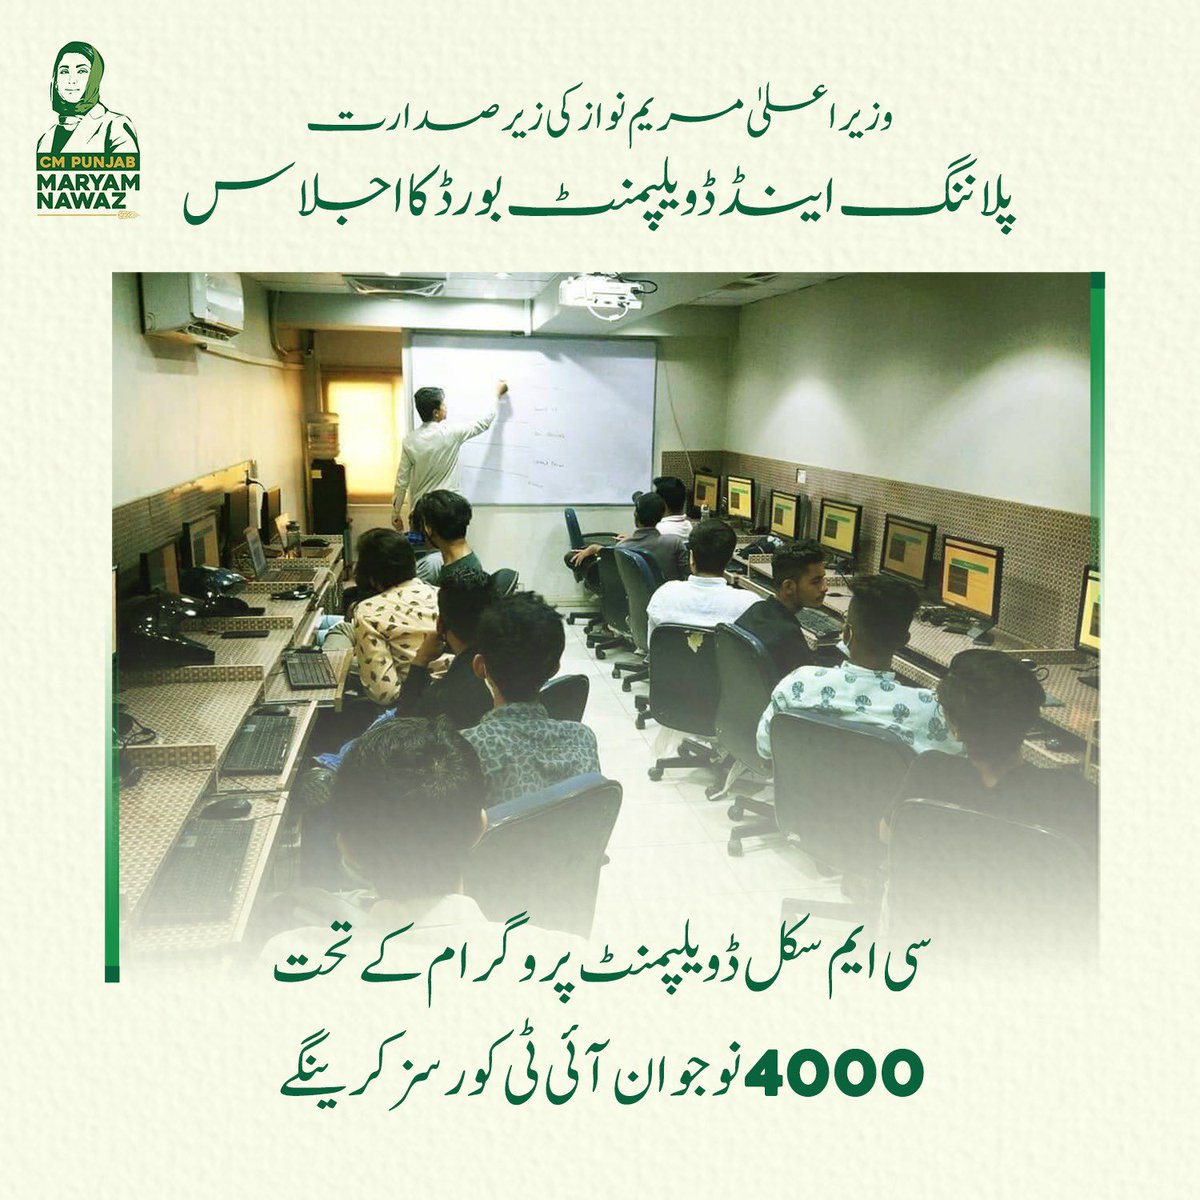 At the Planning and Development Board meeting chaired by Chief Minister Maryam Nawaz, it was announced that 4000 youth will undertake IT courses as part of the CM Skill Development Program.